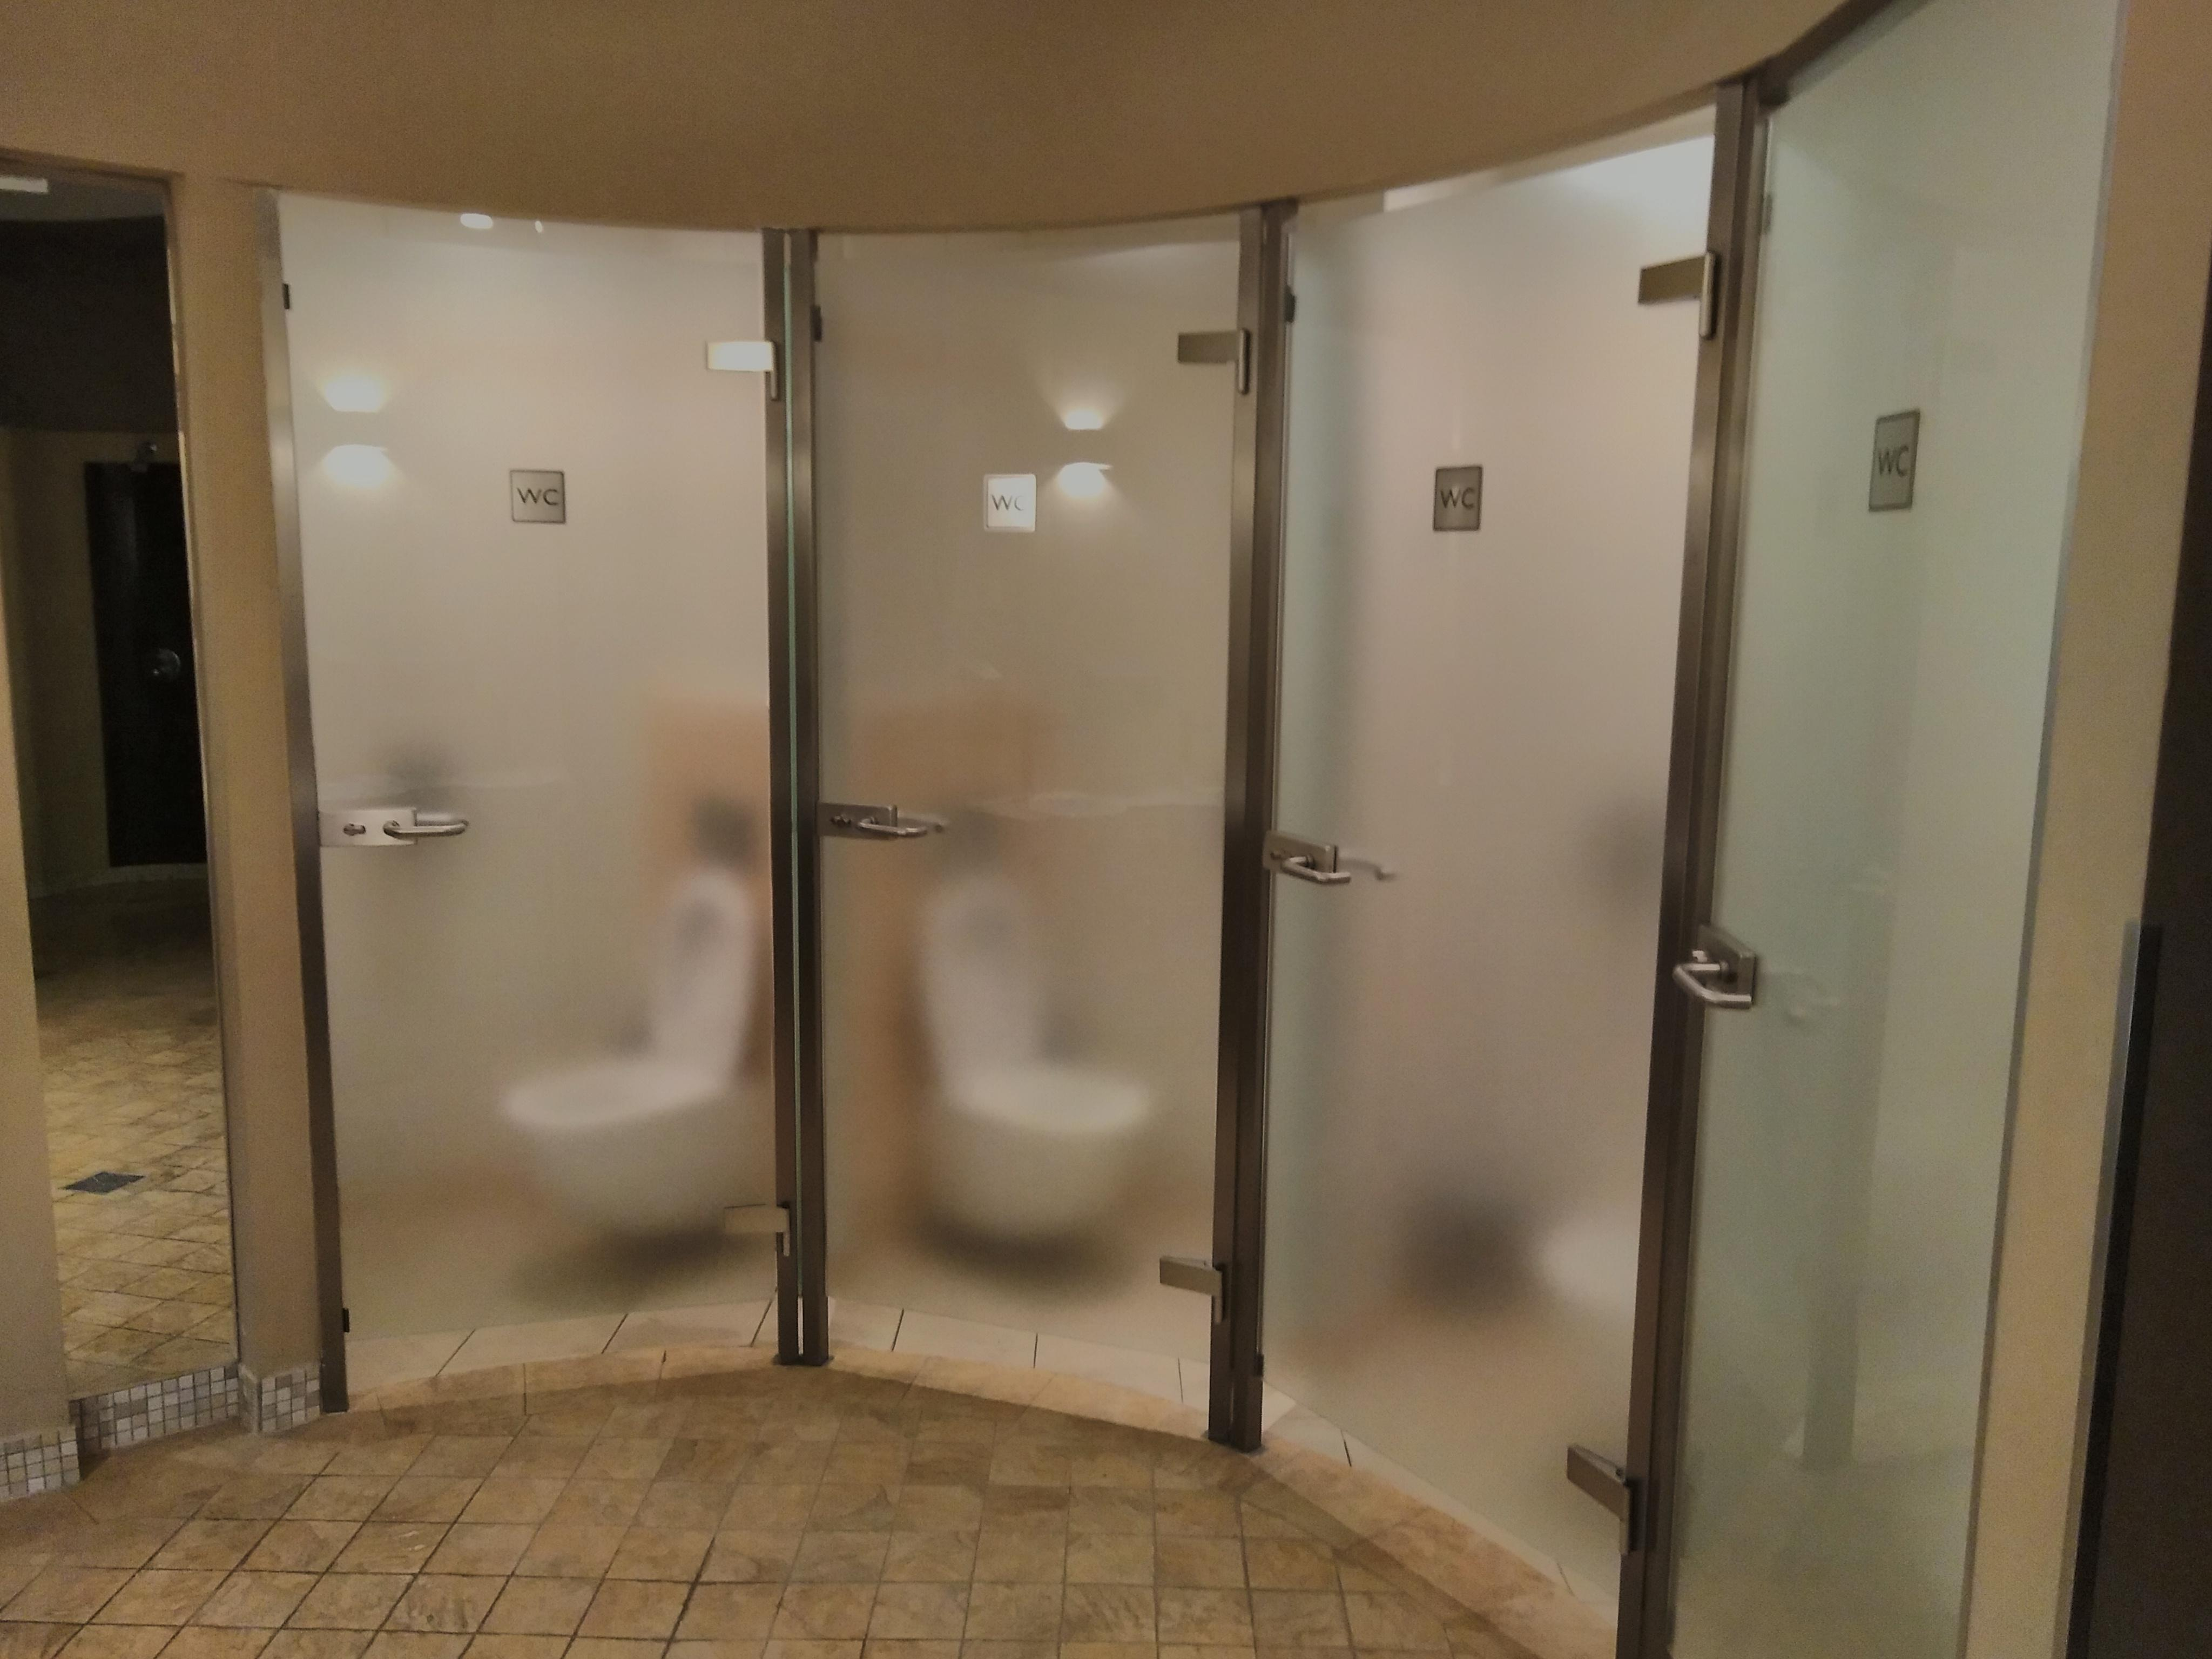 Super Awkward Semi Transparent Bathroom Stall Doors Crappydesign within dimensions 4096 X 3072